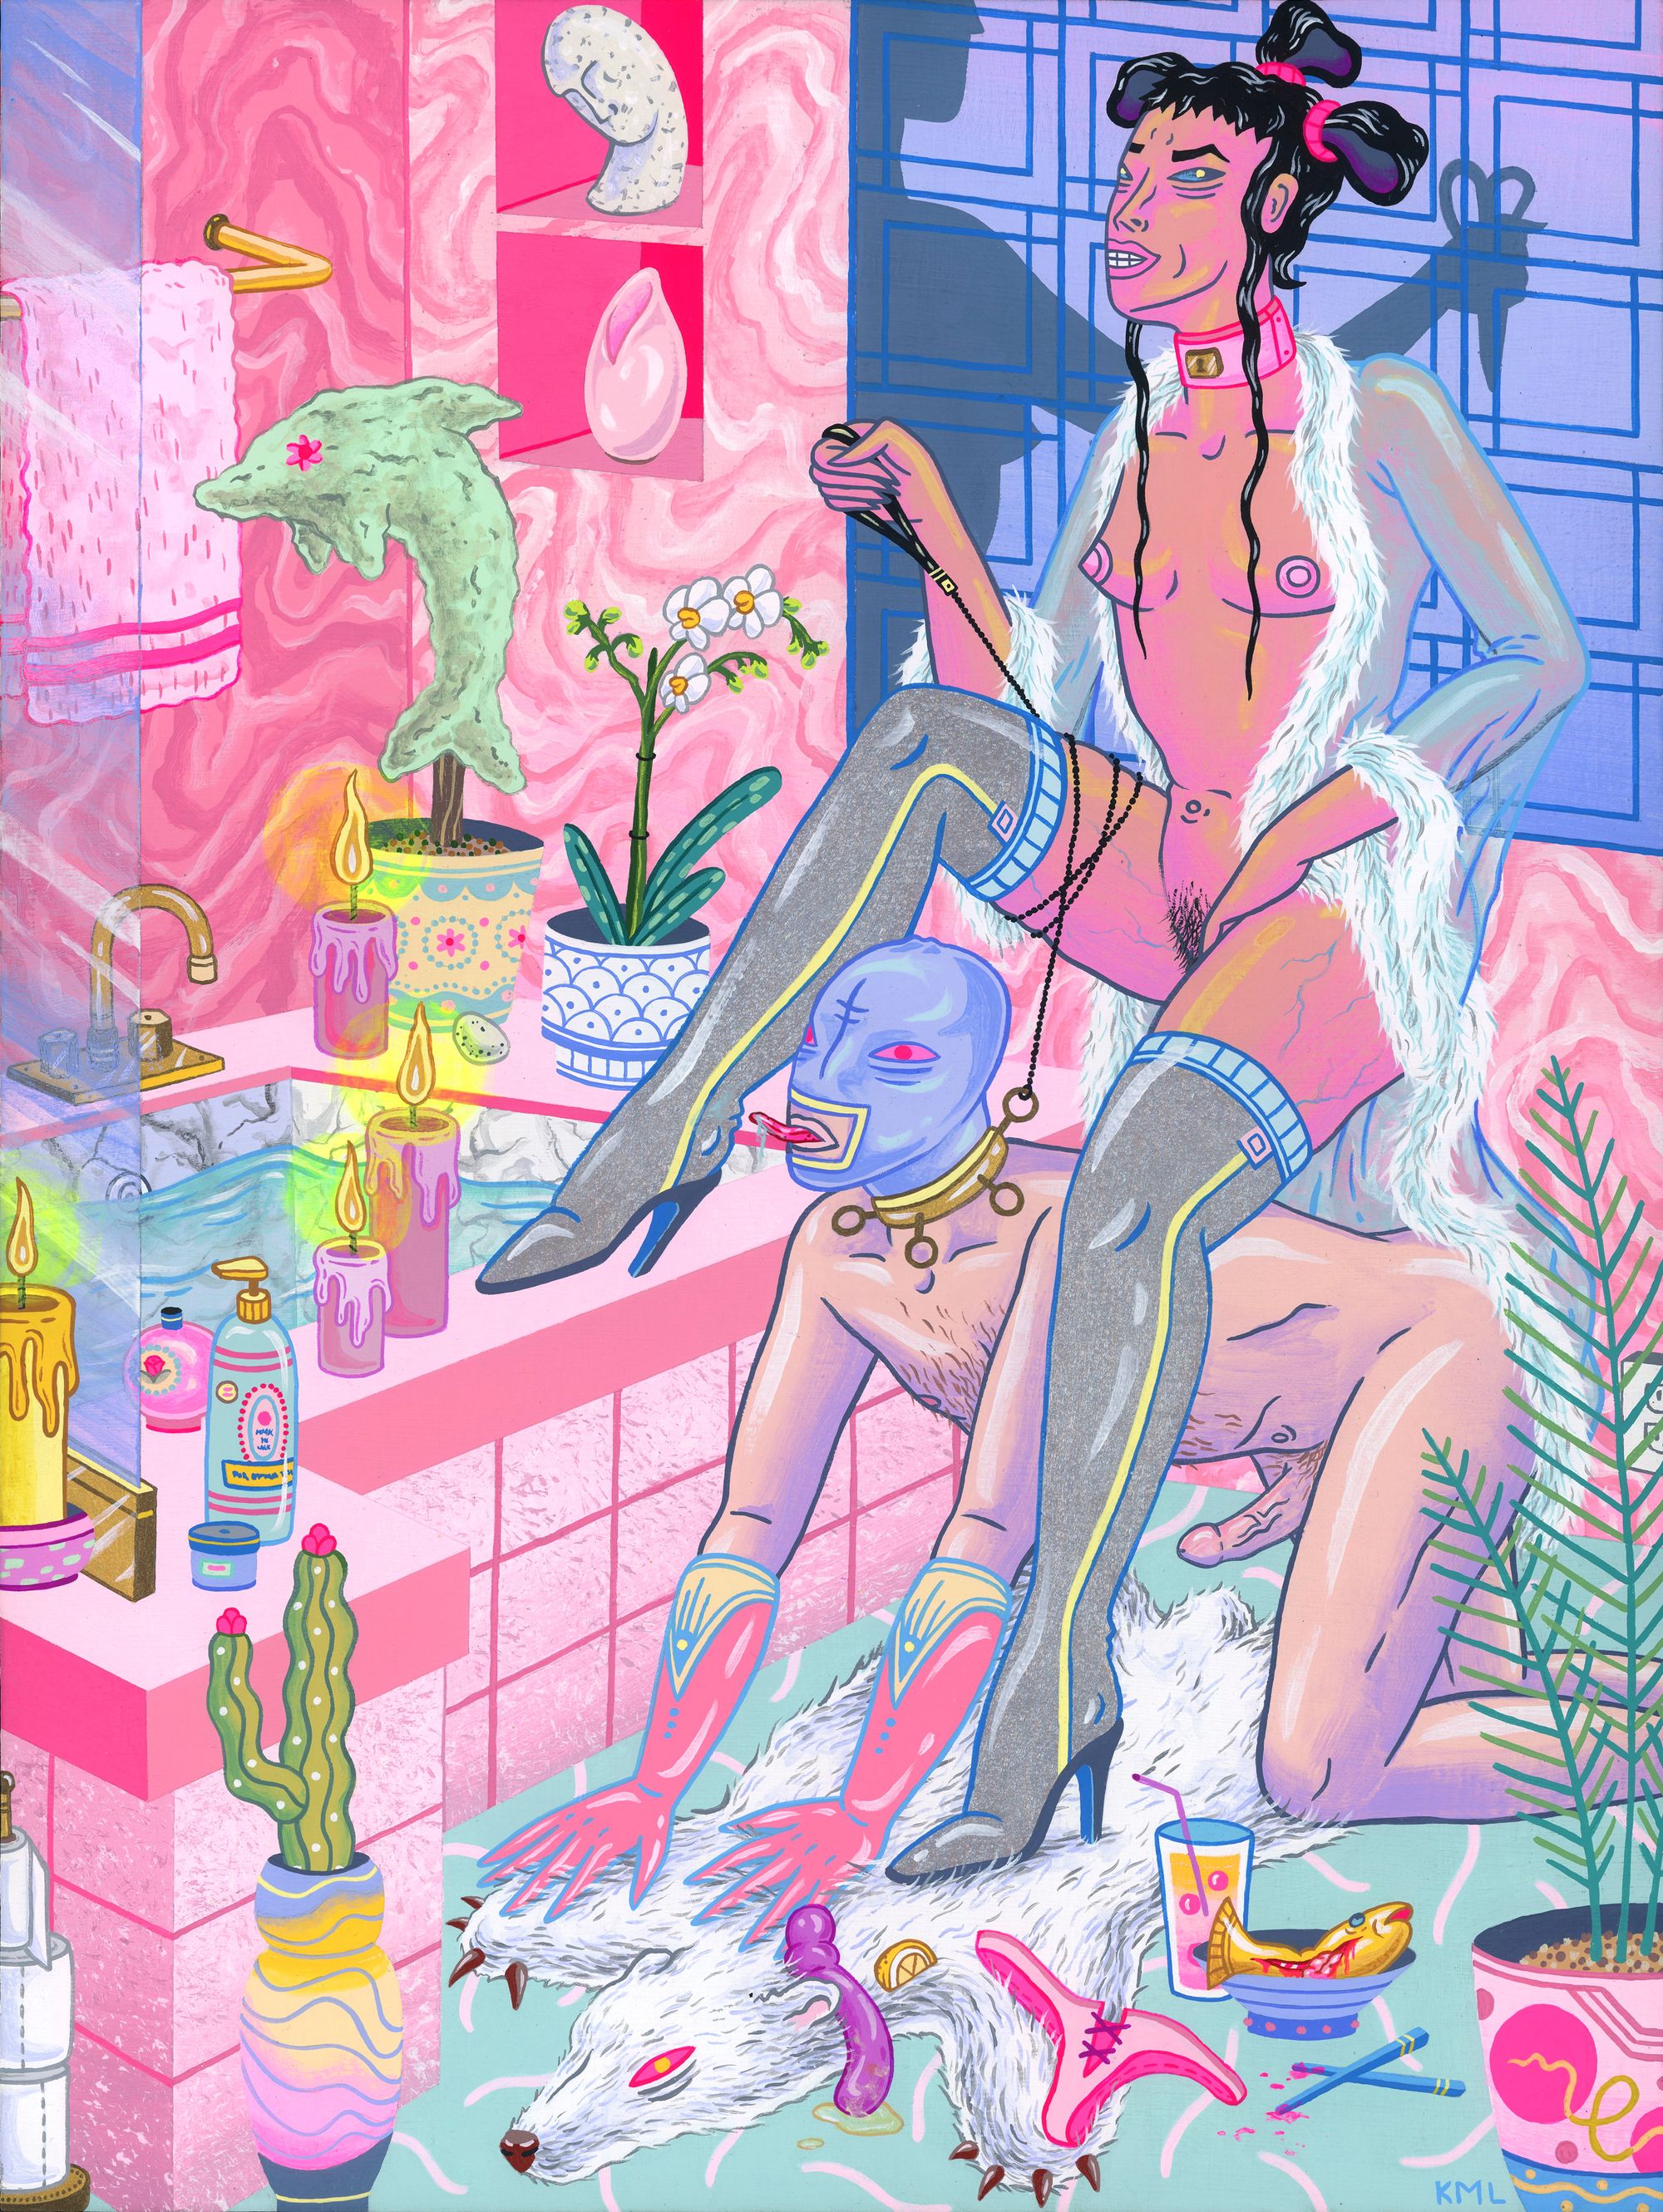 Painter and illustrator Kristen Liu-Wong's painting titled Get It Clean depicts a nude woman wearing a sheer silk robe and thigh high boots riding on the back of a nude man on all fours on the ground wearing a BDSM mask. They are in a bathroom beside the bathtub surrounded by lit candles and plants.